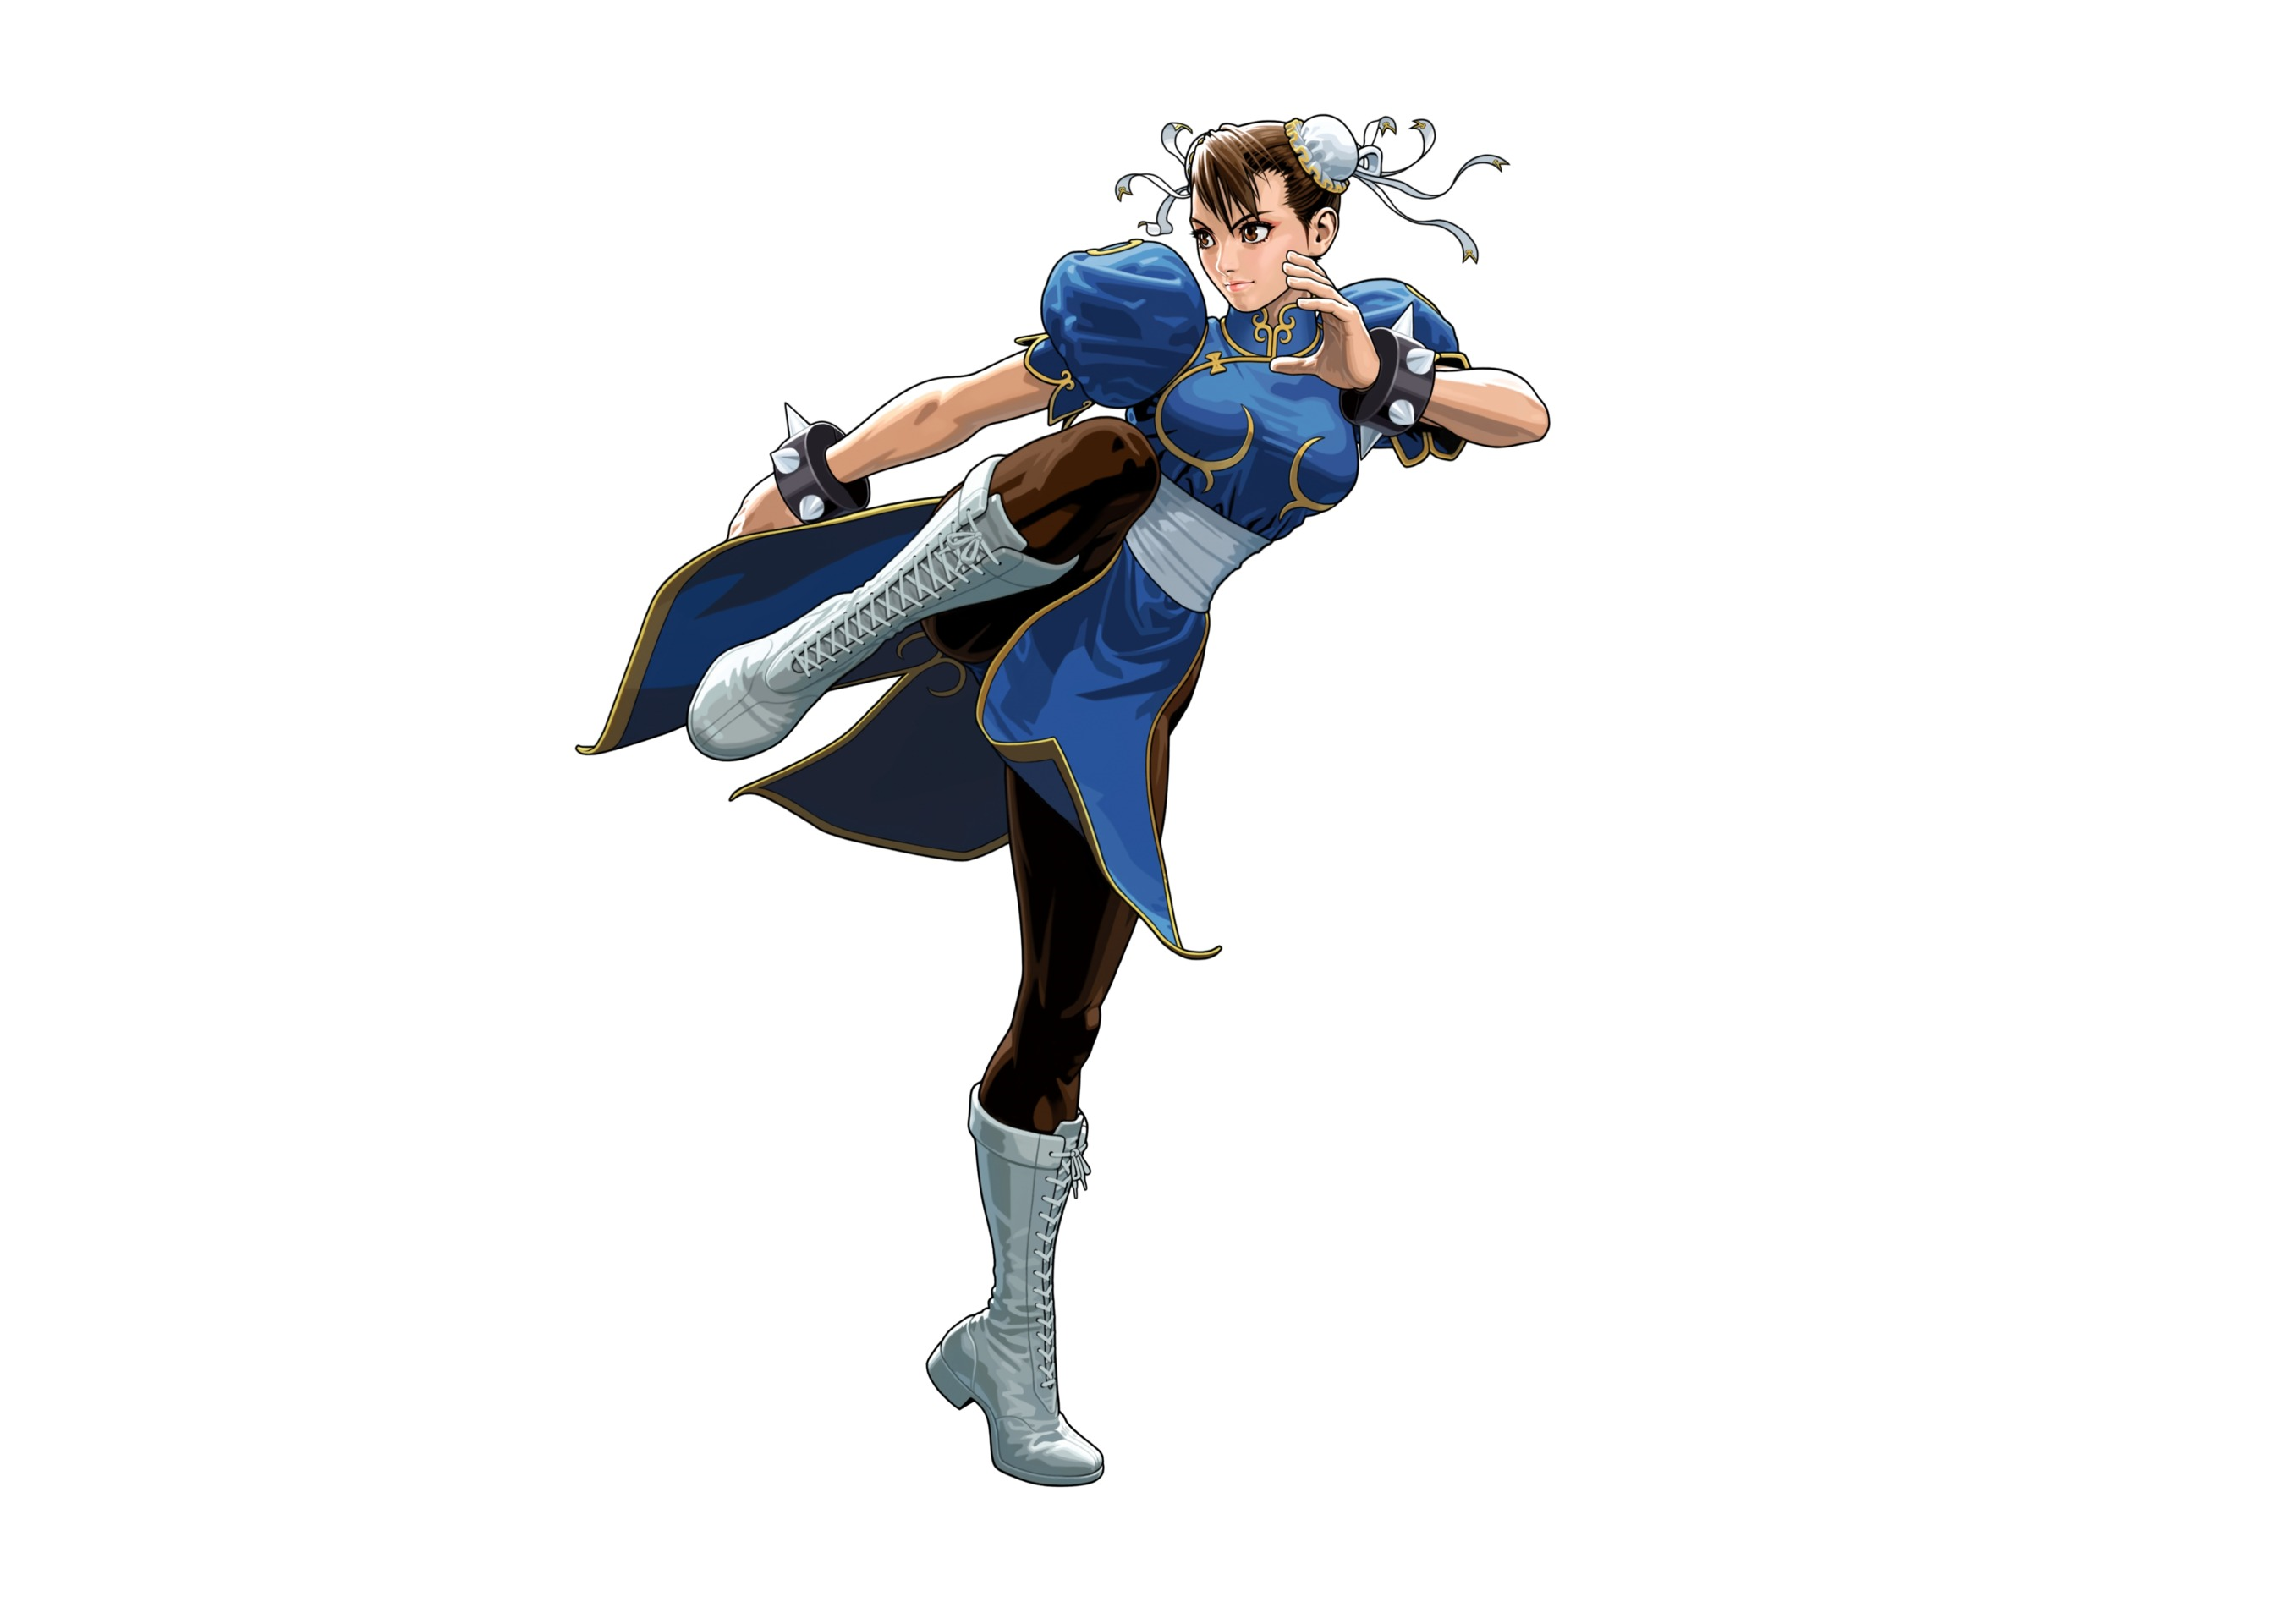 Our favourite Street Fighter characters